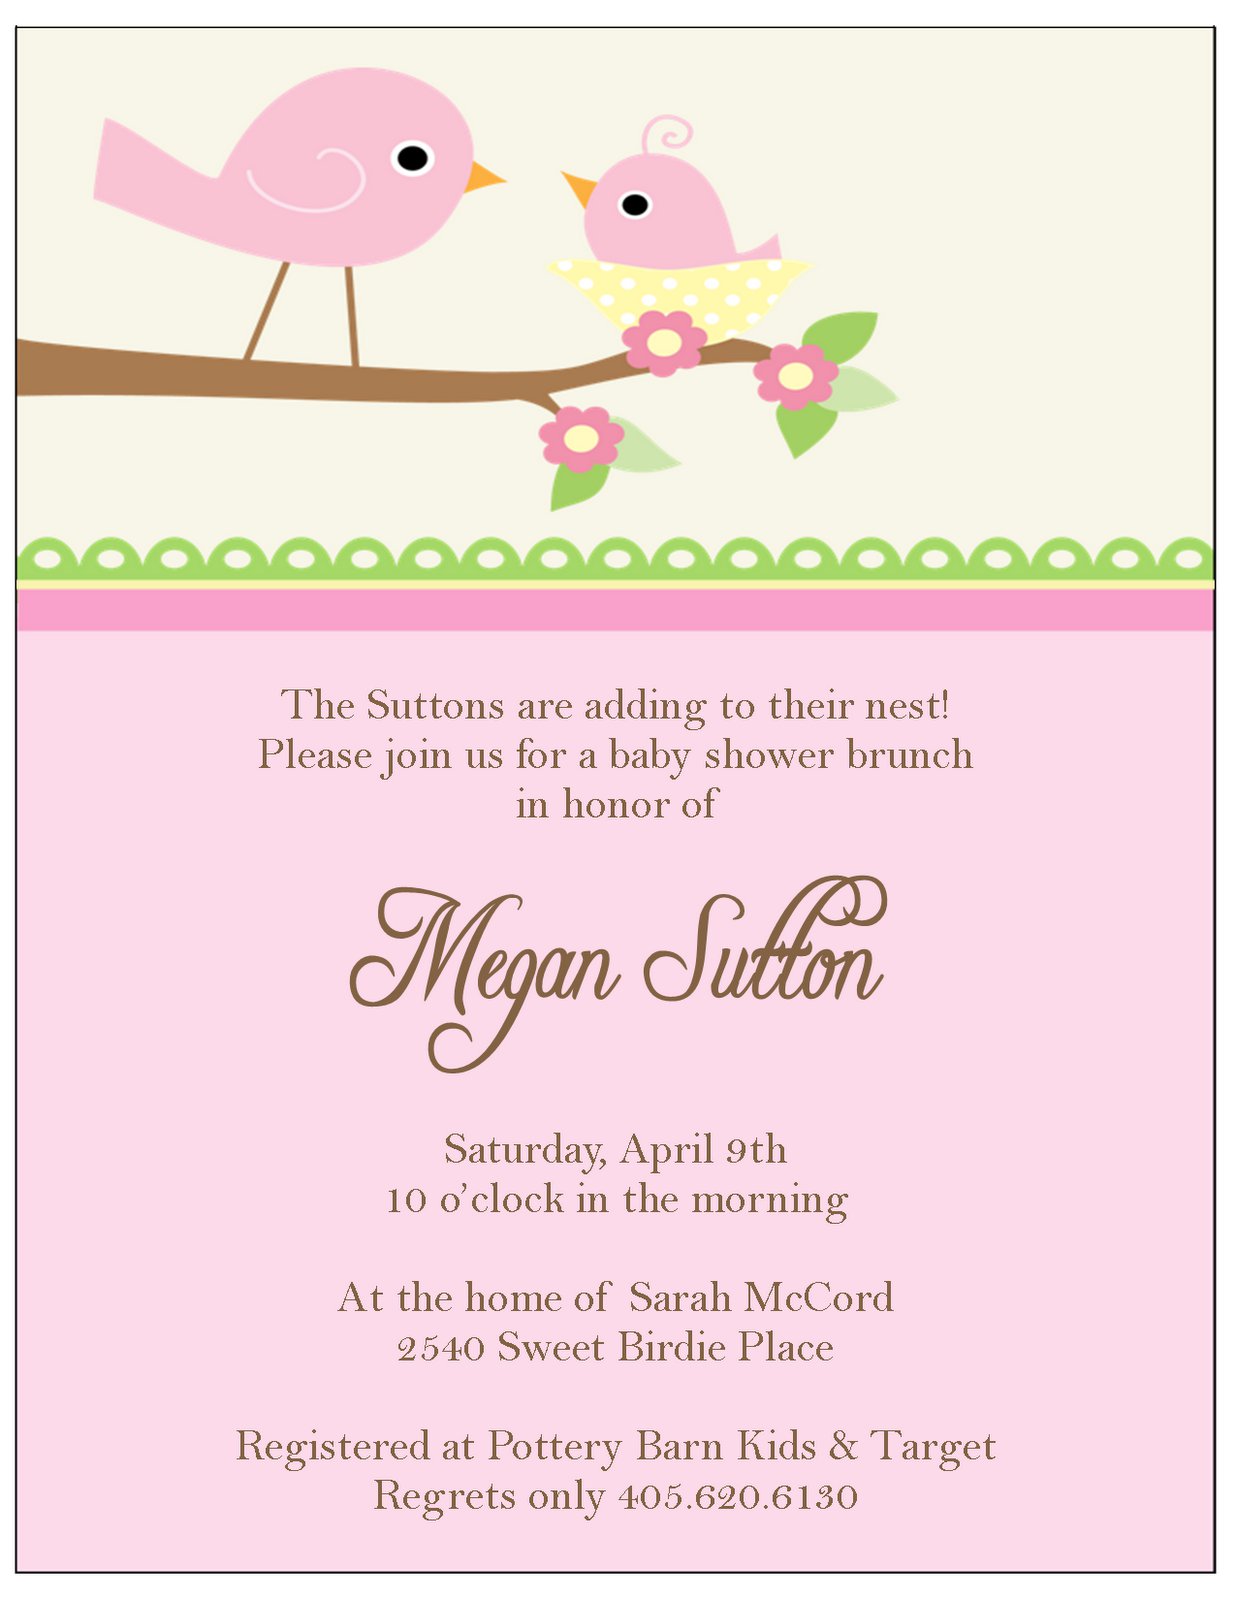 Full Size of Baby Shower:delightful Baby Shower Invitation Wording Picture Designs Best Baby Shower Gifts 2018 Baby Shower Hostess Gifts Throwing A Baby Shower Unique Baby Shower Favors Baby Shower Halls Baby Shower Locations